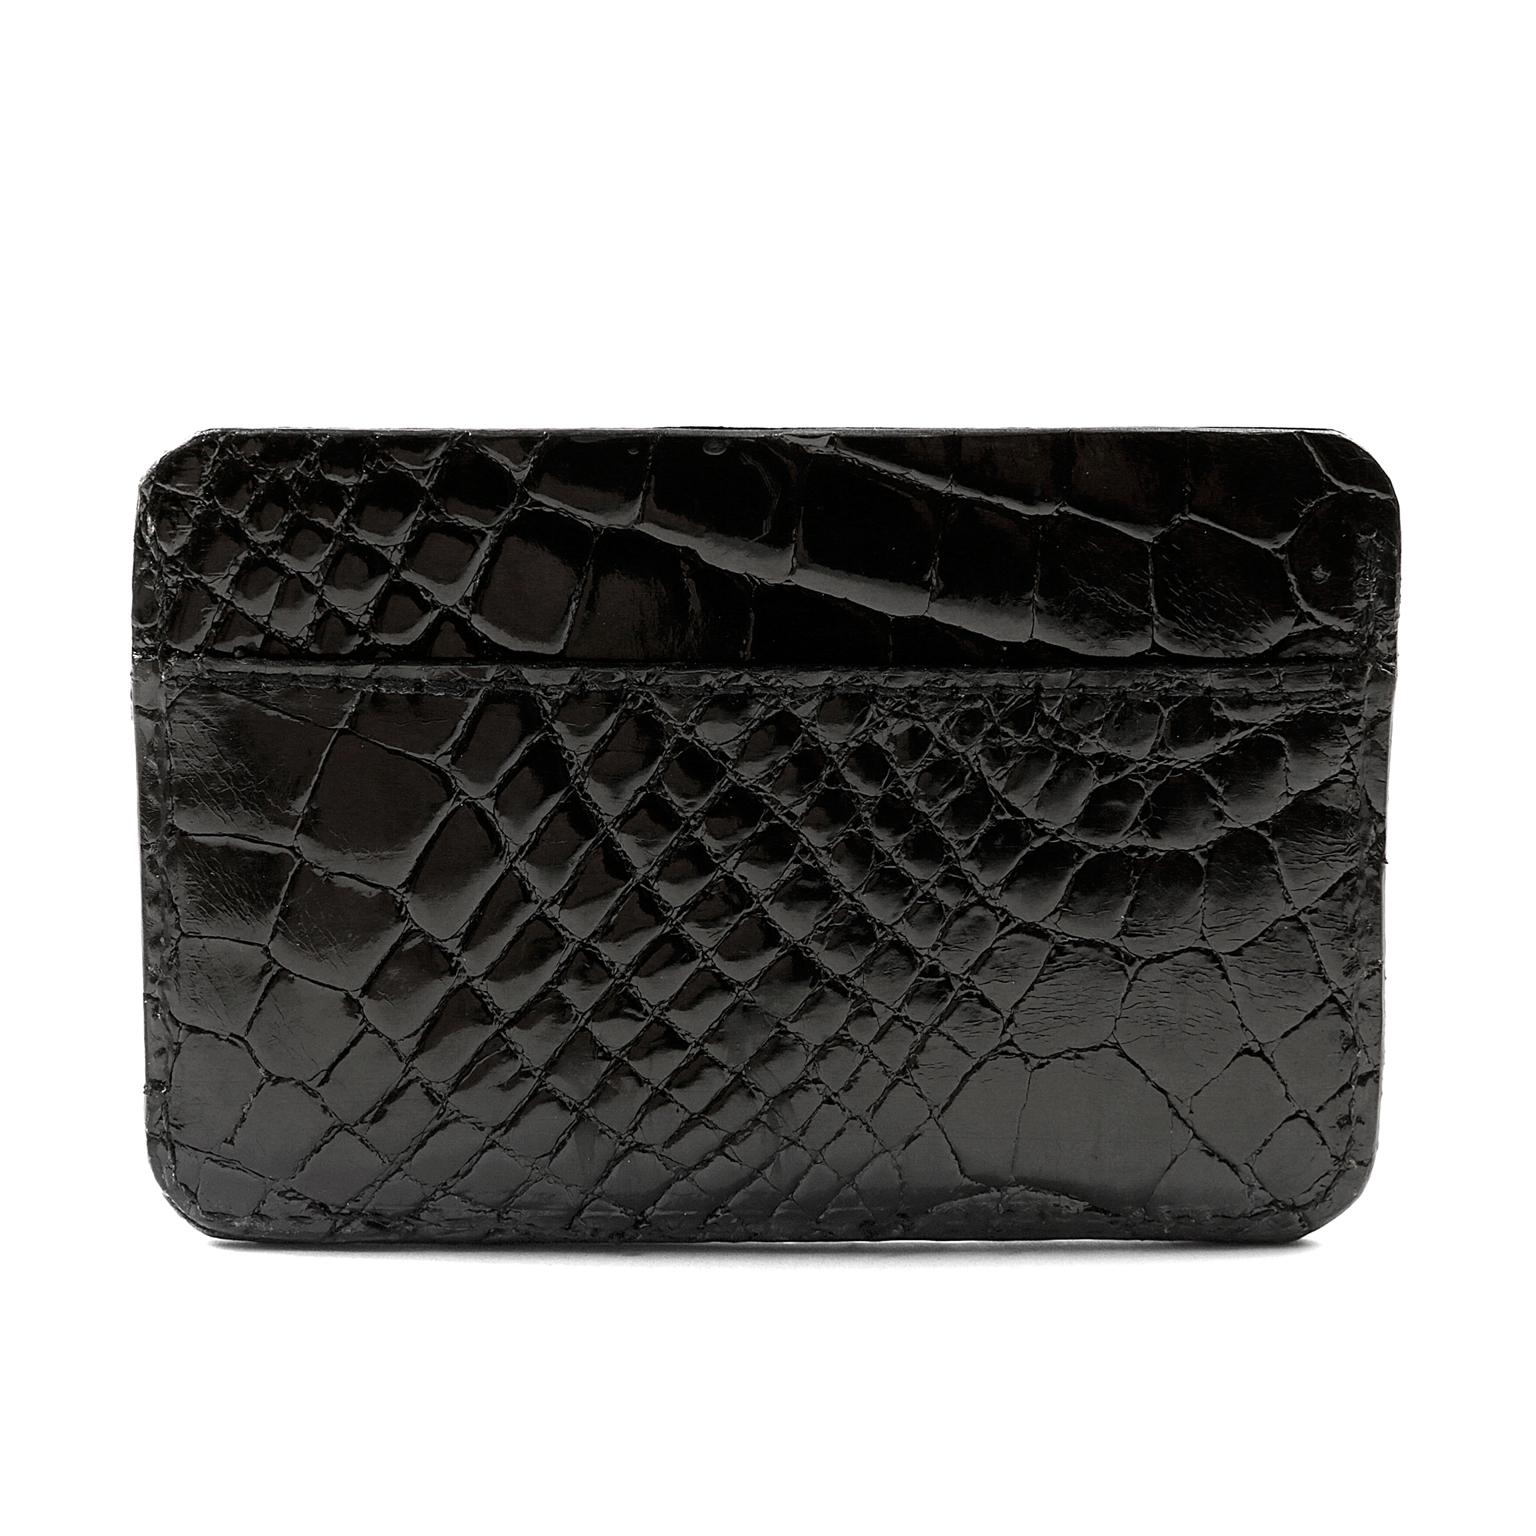 Dennis Basso Black Alligator Wallet - mint condition.  Small case perfect for cards.  Unisex. 
